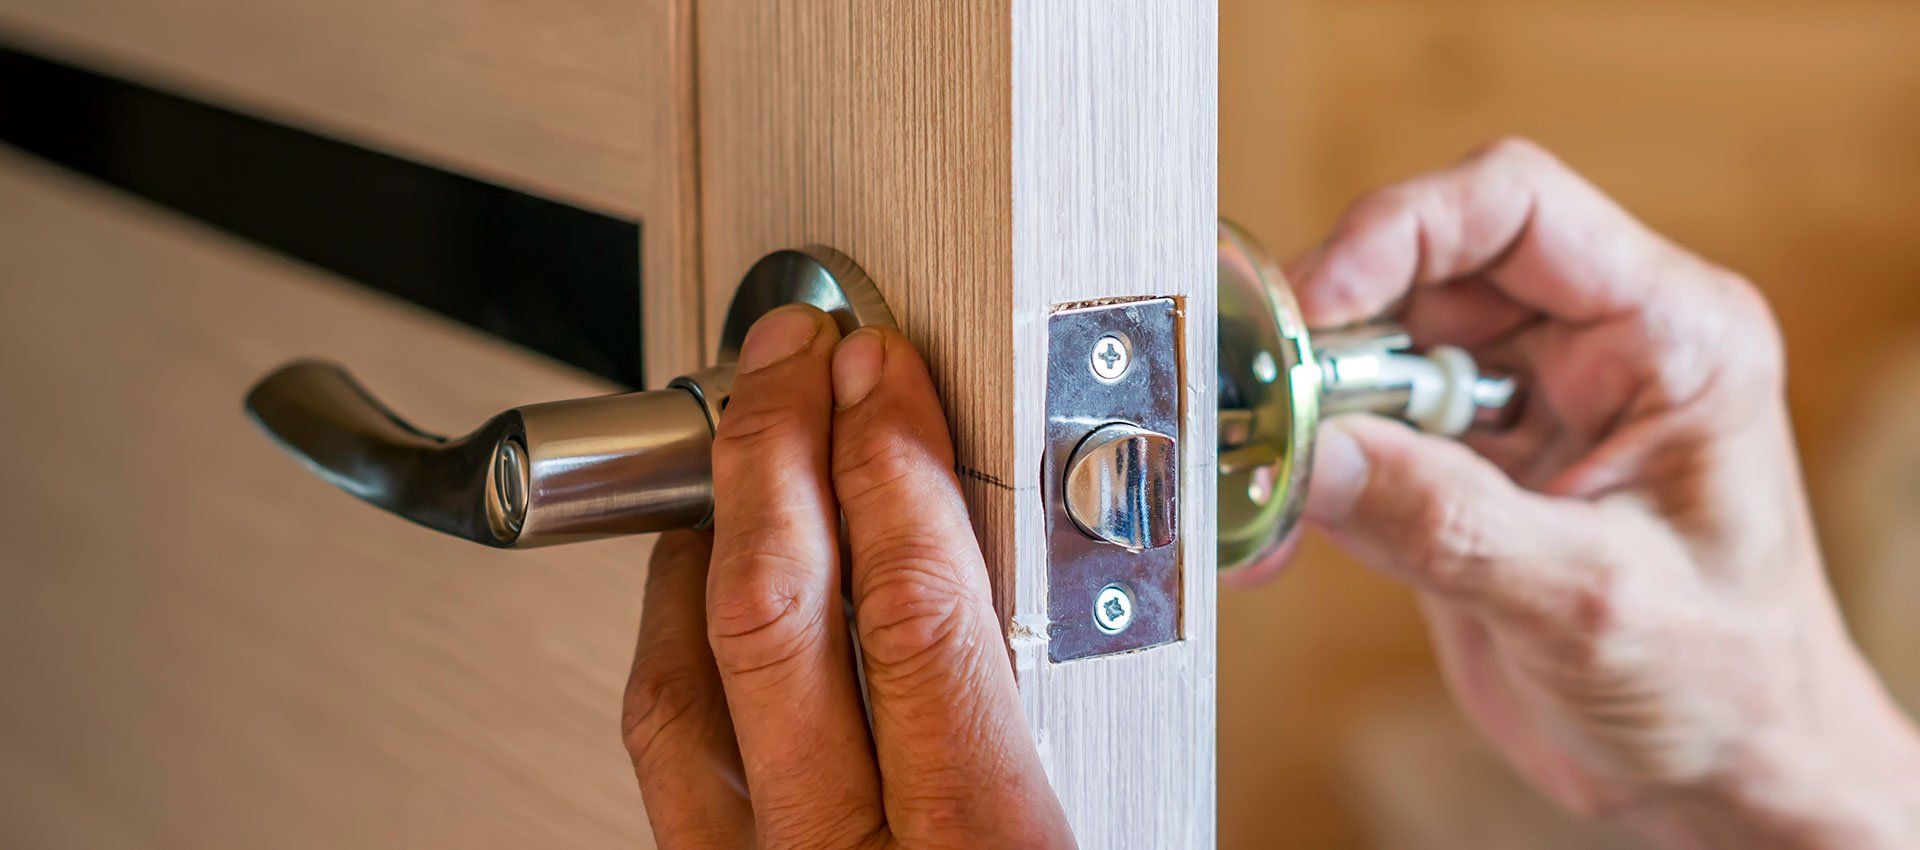 Rely on our experts for fitting your door handles